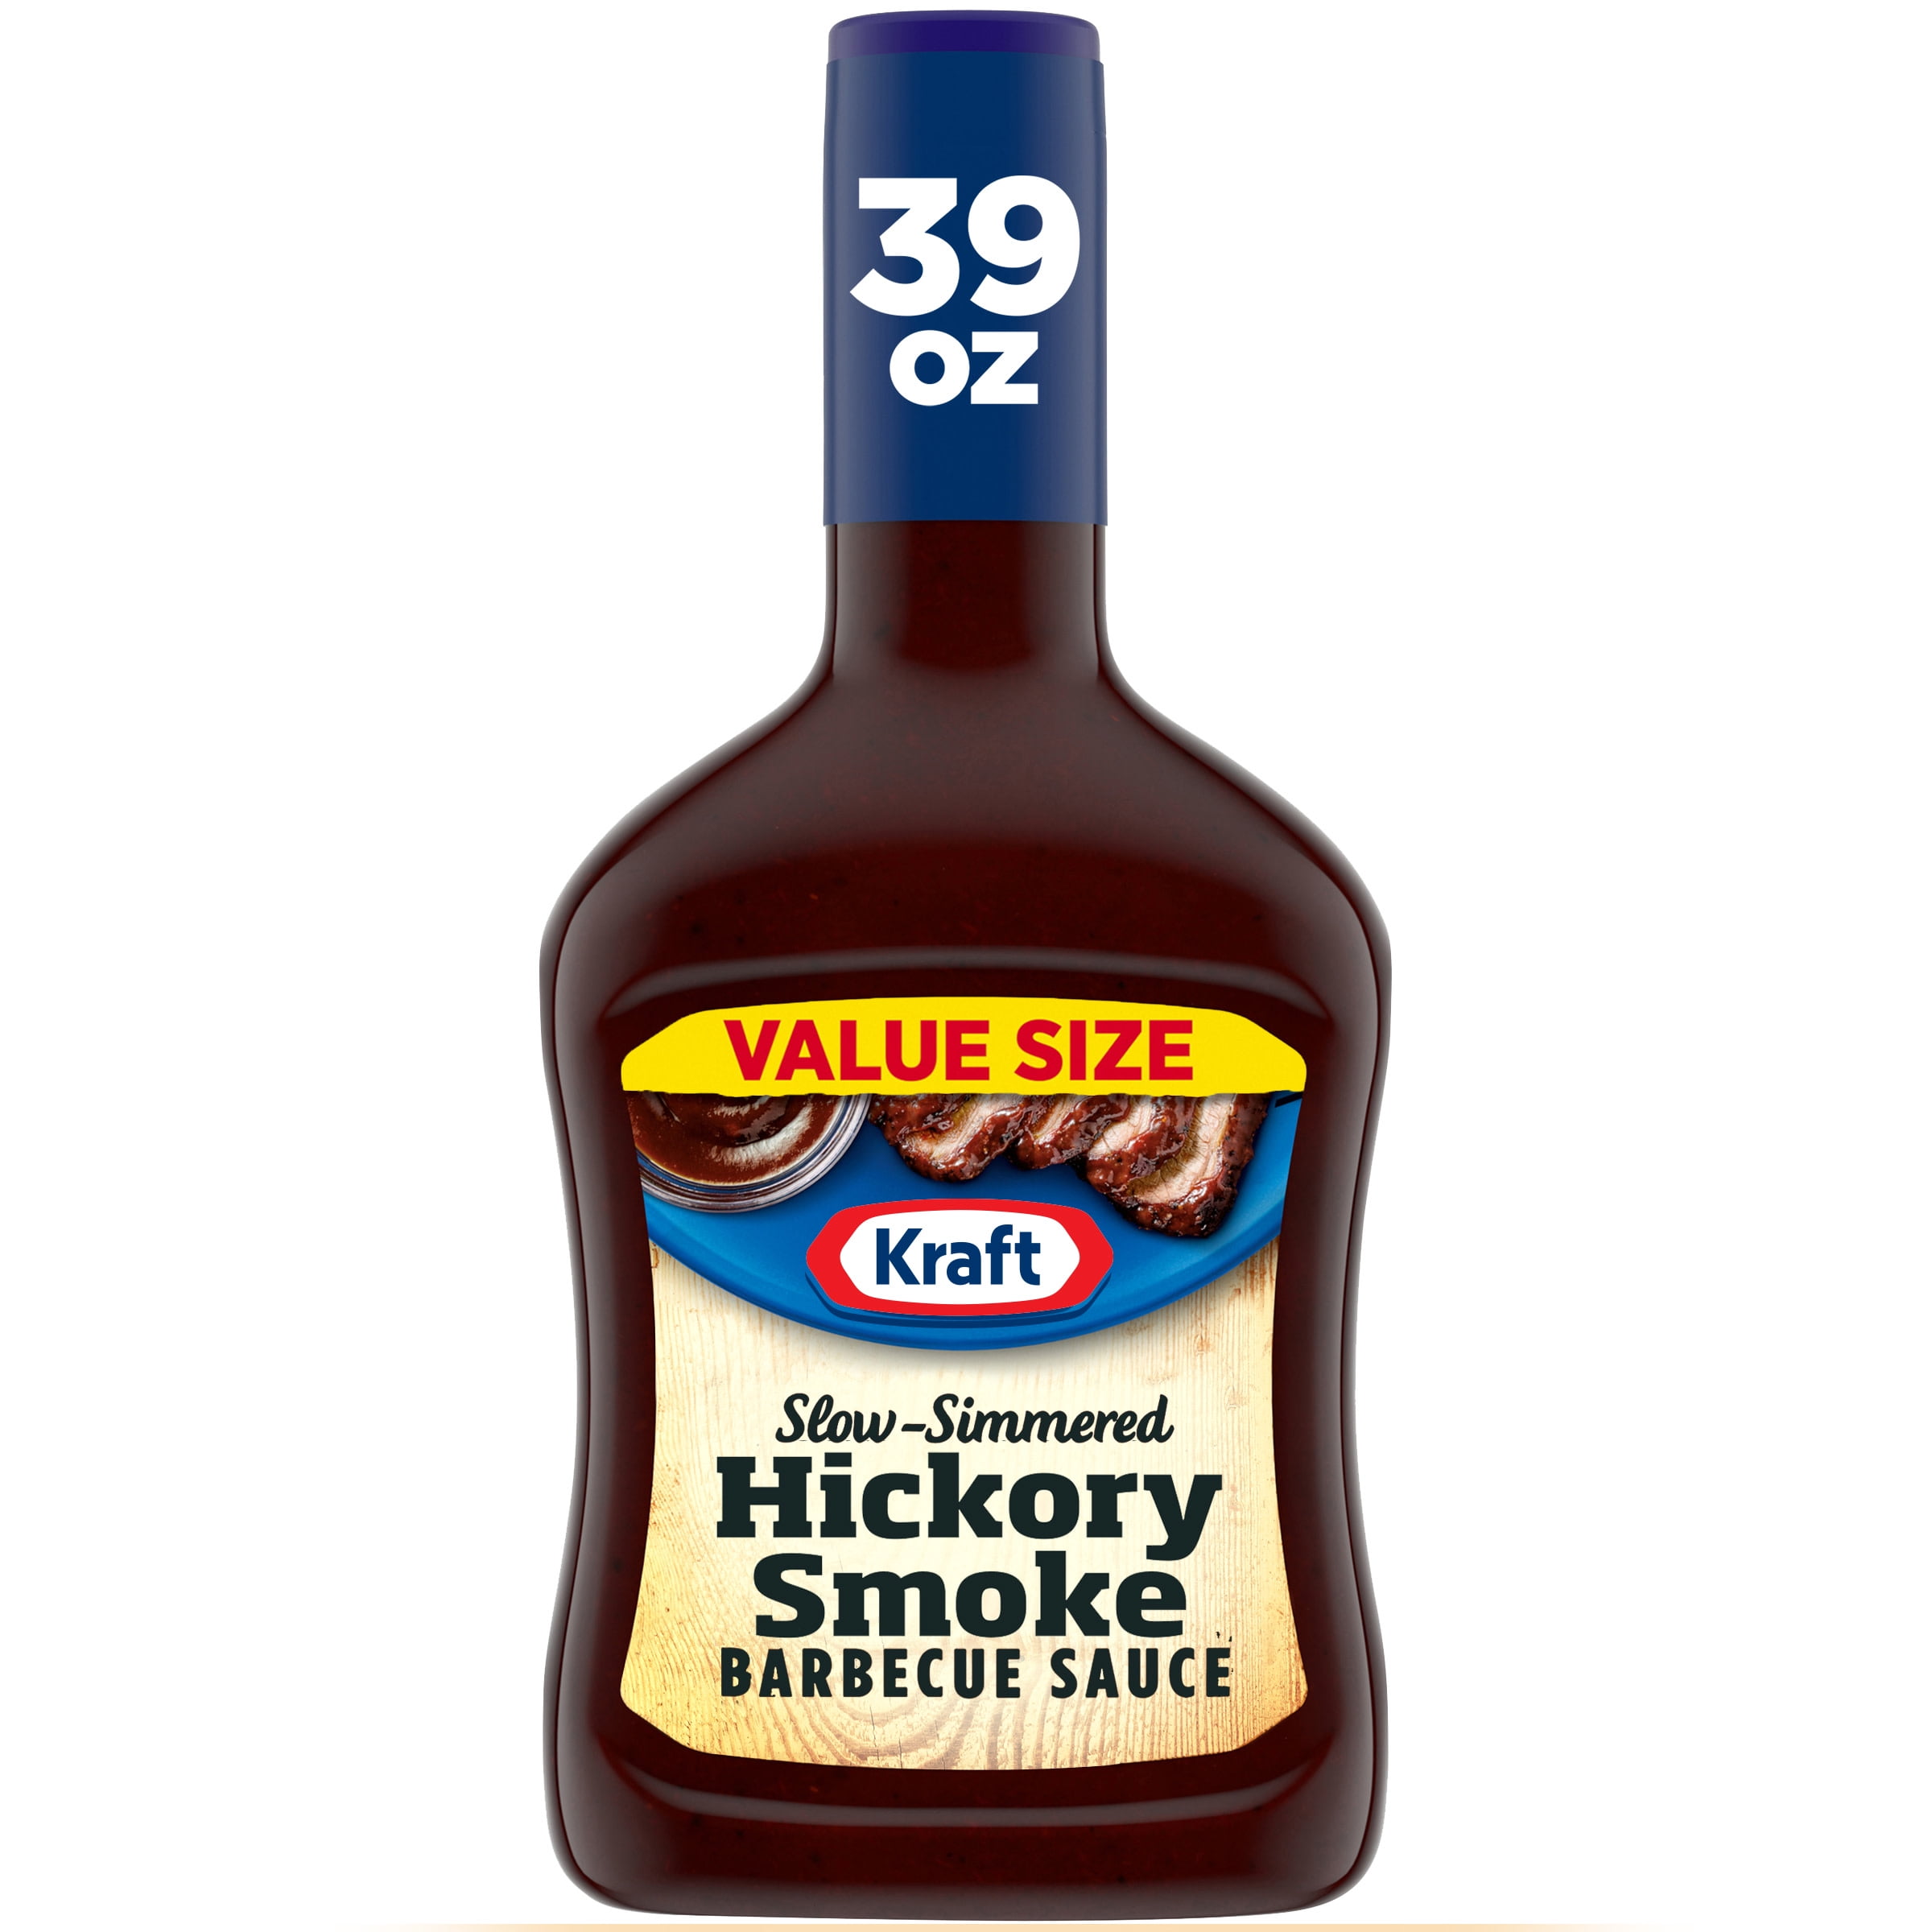 Kraft Hickory Smoke Slow-Simmered Barbecue BBQ Sauce Value Size, 39 oz Bottle